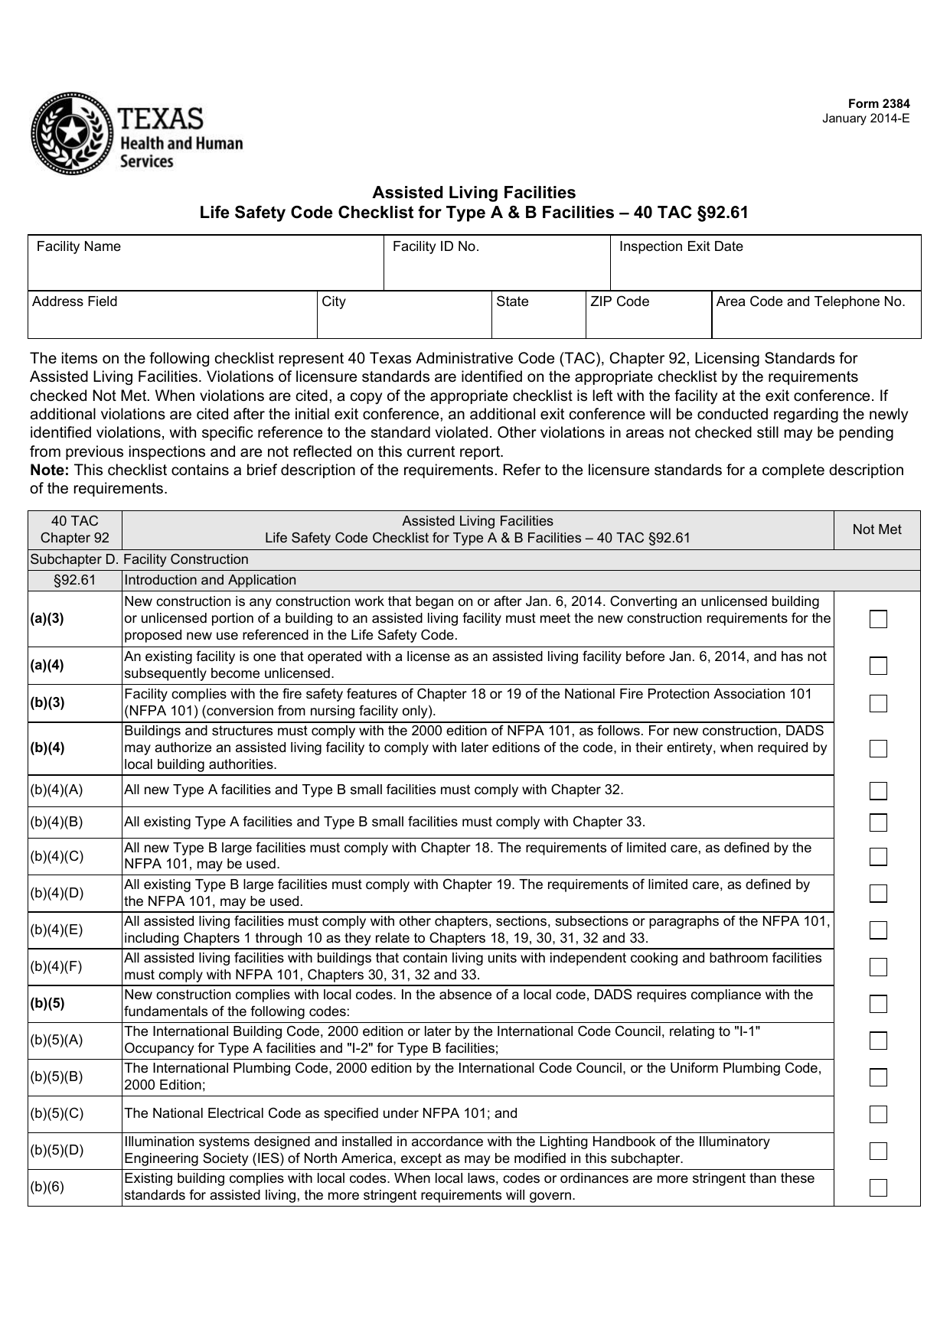 Form 2384 Assisted Living Facilities Life Safety Code Checklist for Type a  B Facilities - 40 Tac Section 92.61 - Texas, Page 1